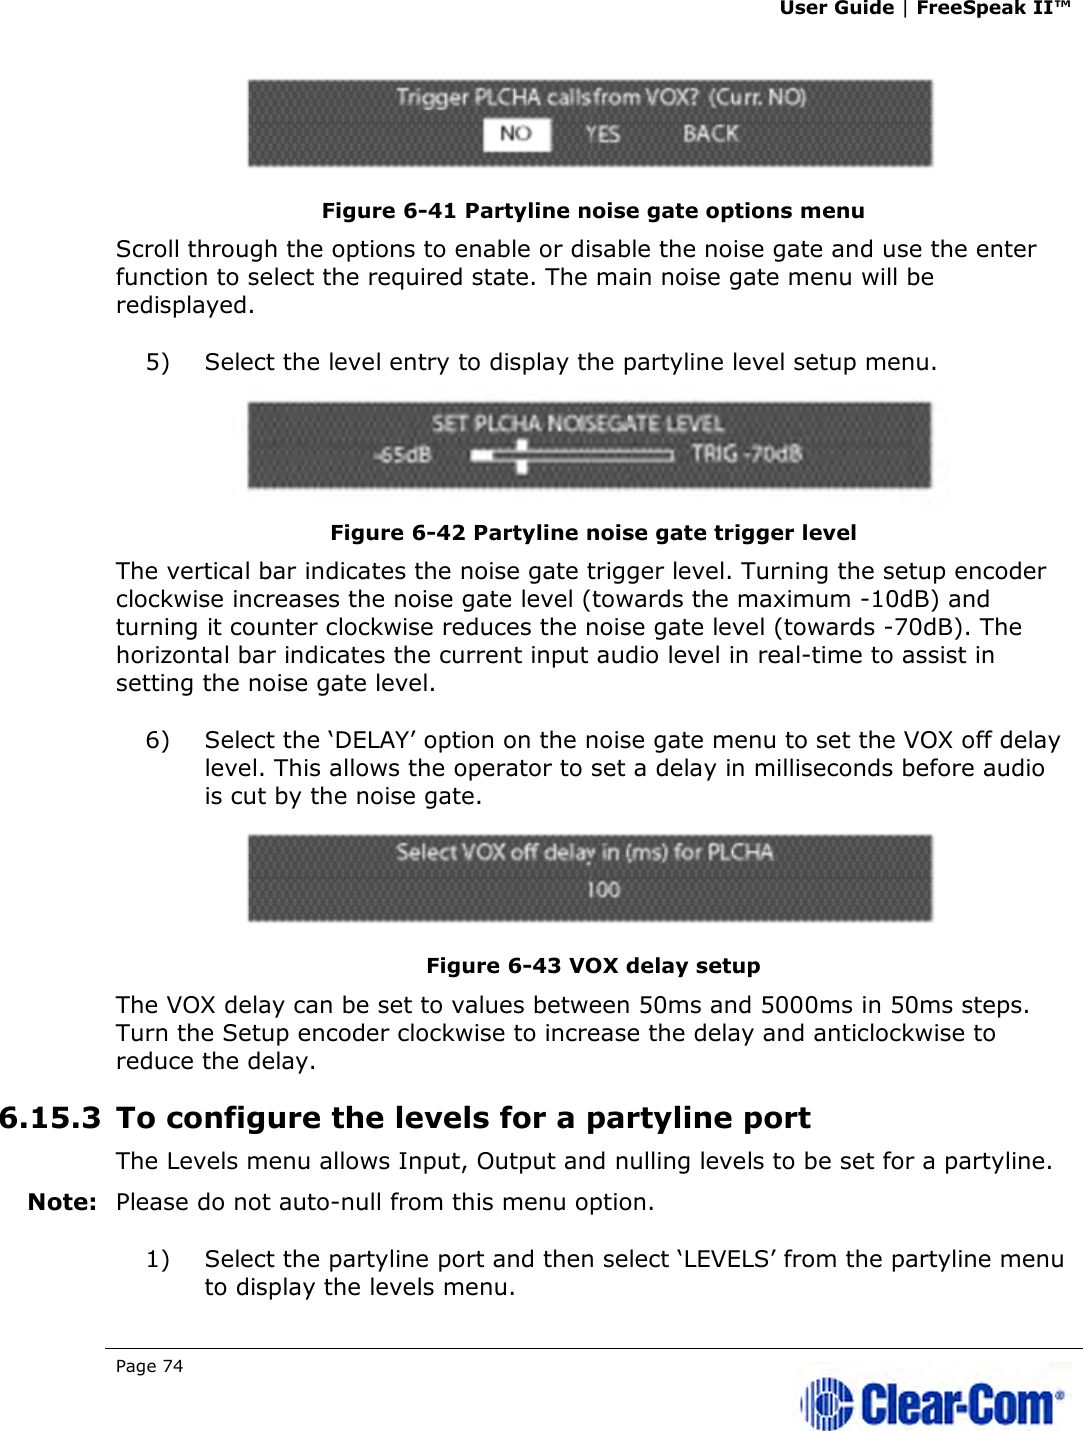 User Guide | FreeSpeak II™  Page 74    Figure 6-41 Partyline noise gate options menu Scroll through the options to enable or disable the noise gate and use the enter function to select the required state. The main noise gate menu will be redisplayed. 5) Select the level entry to display the partyline level setup menu.  Figure 6-42 Partyline noise gate trigger level The vertical bar indicates the noise gate trigger level. Turning the setup encoder clockwise increases the noise gate level (towards the maximum -10dB) and turning it counter clockwise reduces the noise gate level (towards -70dB). The horizontal bar indicates the current input audio level in real-time to assist in setting the noise gate level. 6) Select the ‘DELAY’ option on the noise gate menu to set the VOX off delay level. This allows the operator to set a delay in milliseconds before audio is cut by the noise gate.  Figure 6-43 VOX delay setup The VOX delay can be set to values between 50ms and 5000ms in 50ms steps. Turn the Setup encoder clockwise to increase the delay and anticlockwise to reduce the delay. 6.15.3 To configure the levels for a partyline port The Levels menu allows Input, Output and nulling levels to be set for a partyline. Note: Please do not auto-null from this menu option. 1) Select the partyline port and then select ‘LEVELS’ from the partyline menu to display the levels menu. 